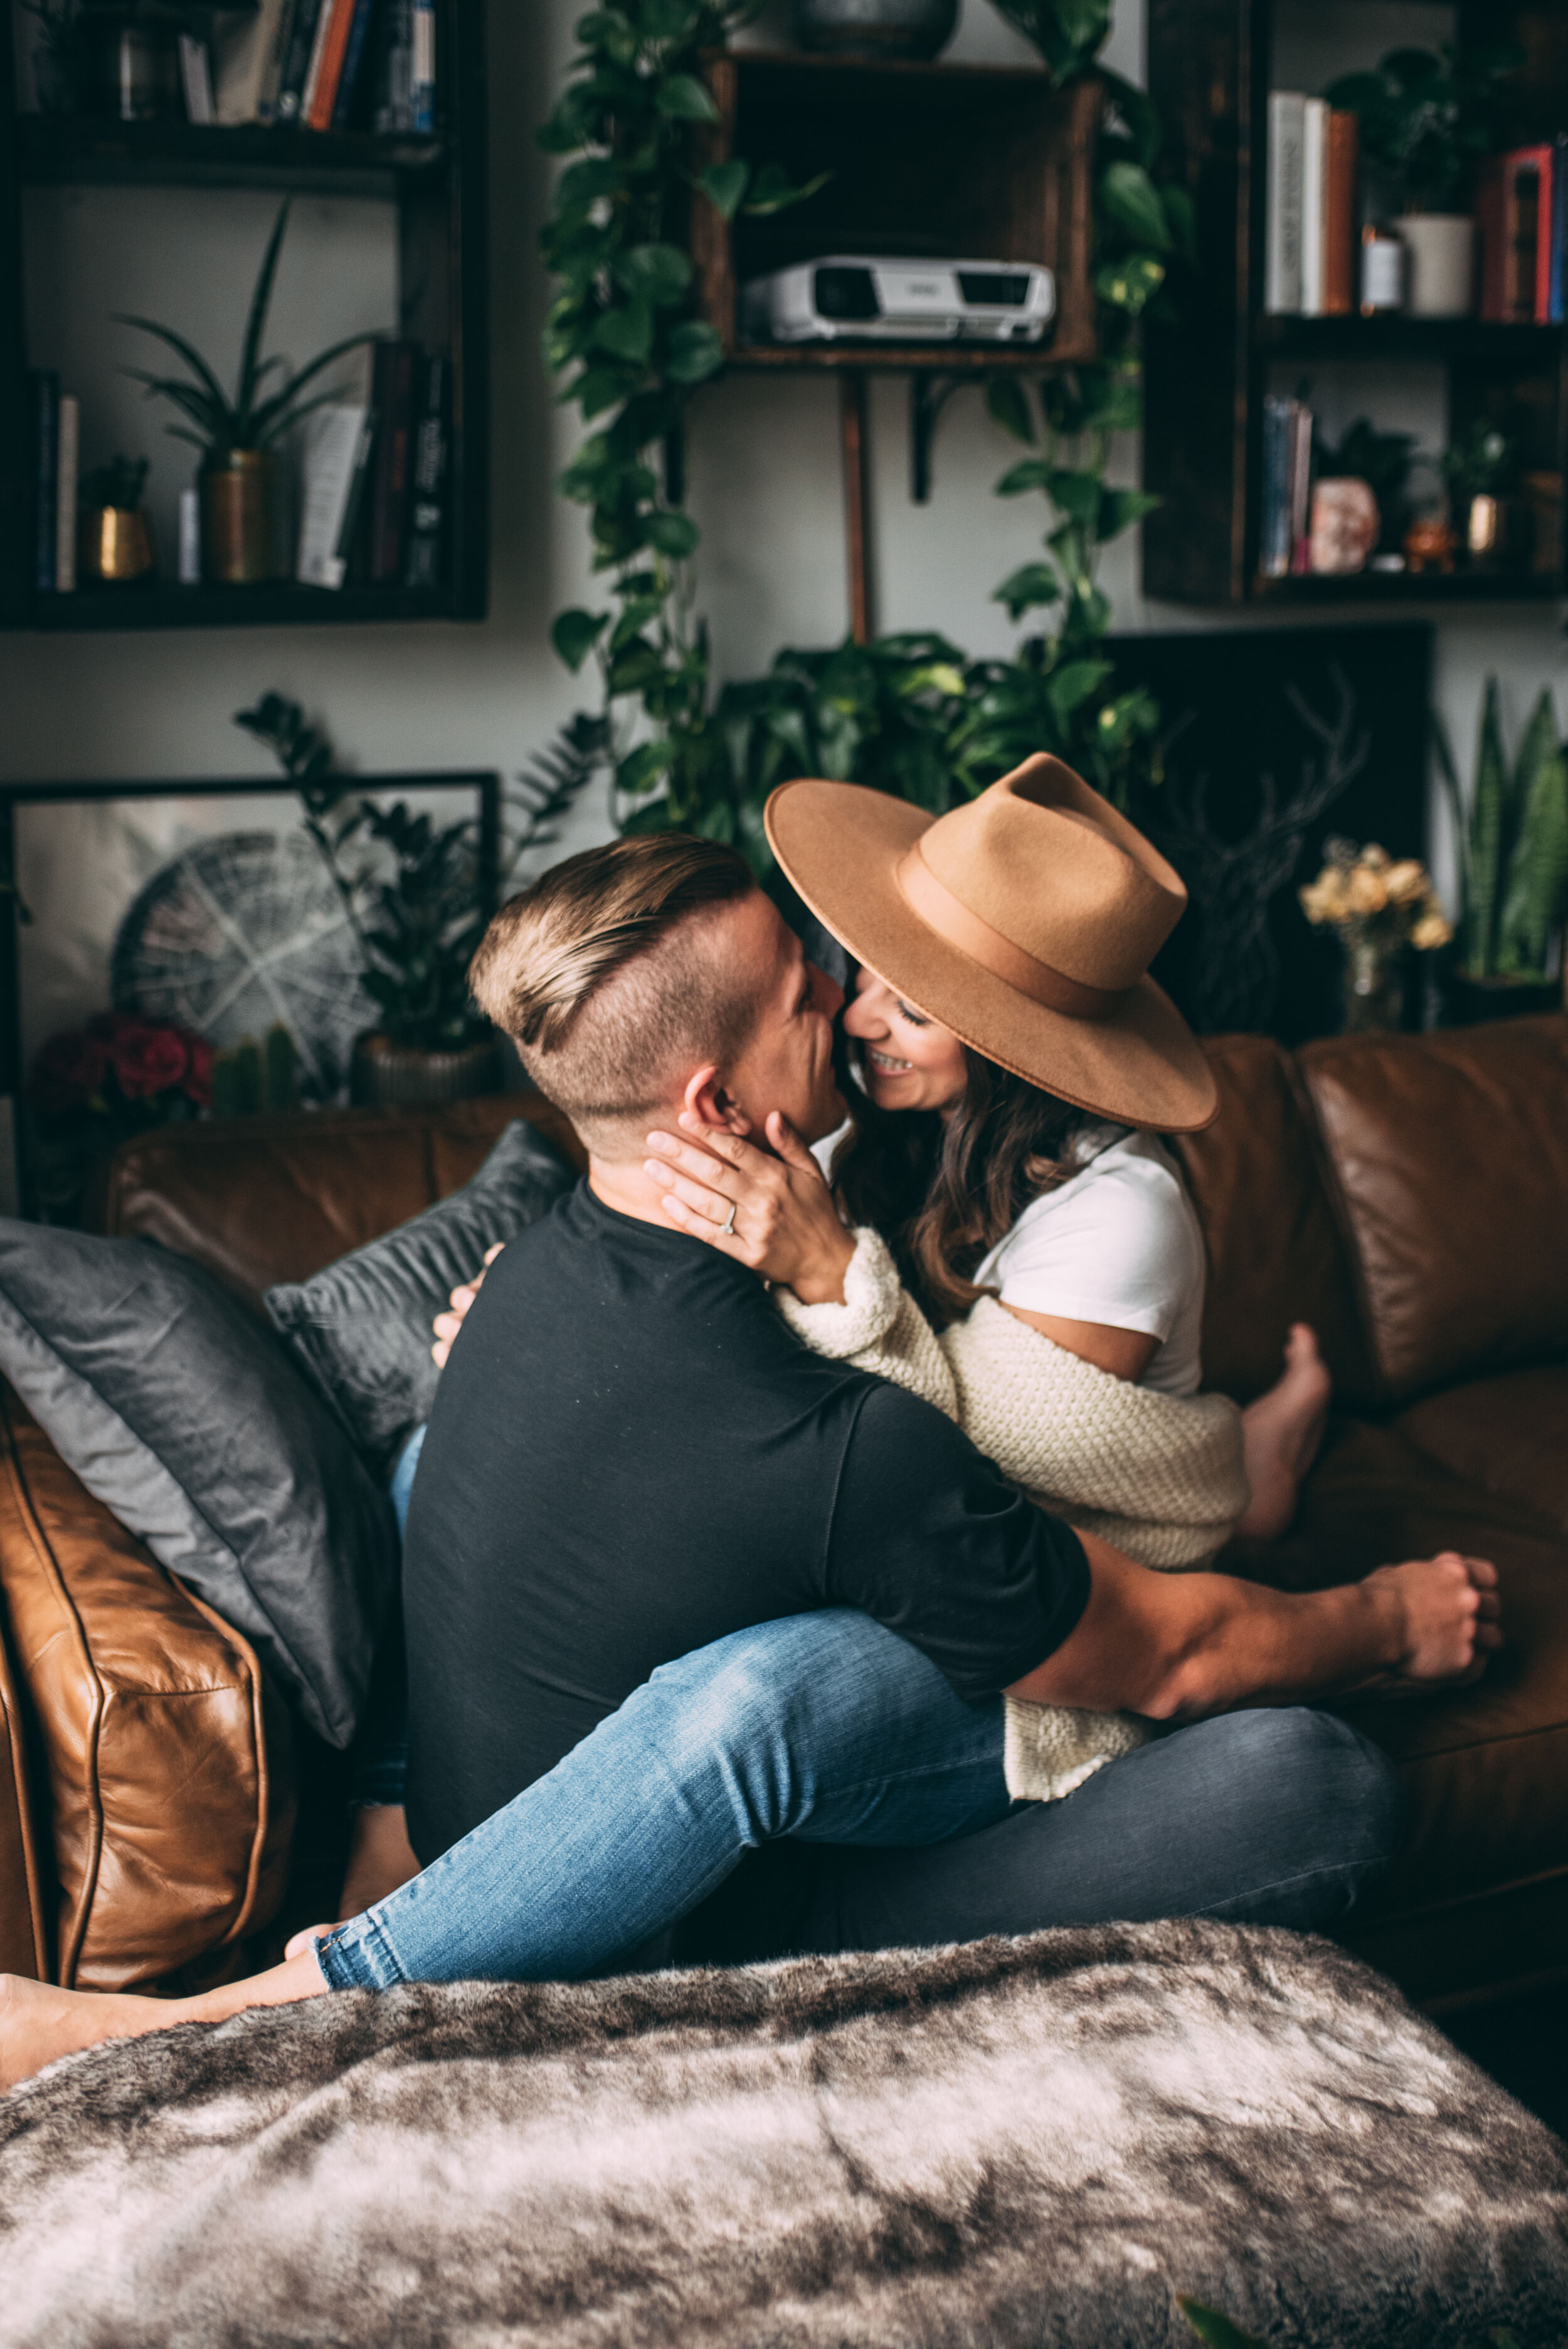 Vancouver Engagement Session - In Home Couples Session - Loft Garden Oasis - Laura Olson Photography - Sunshine Coast BC & Vancouver Wedding & Elopement Photographer7901.jpg